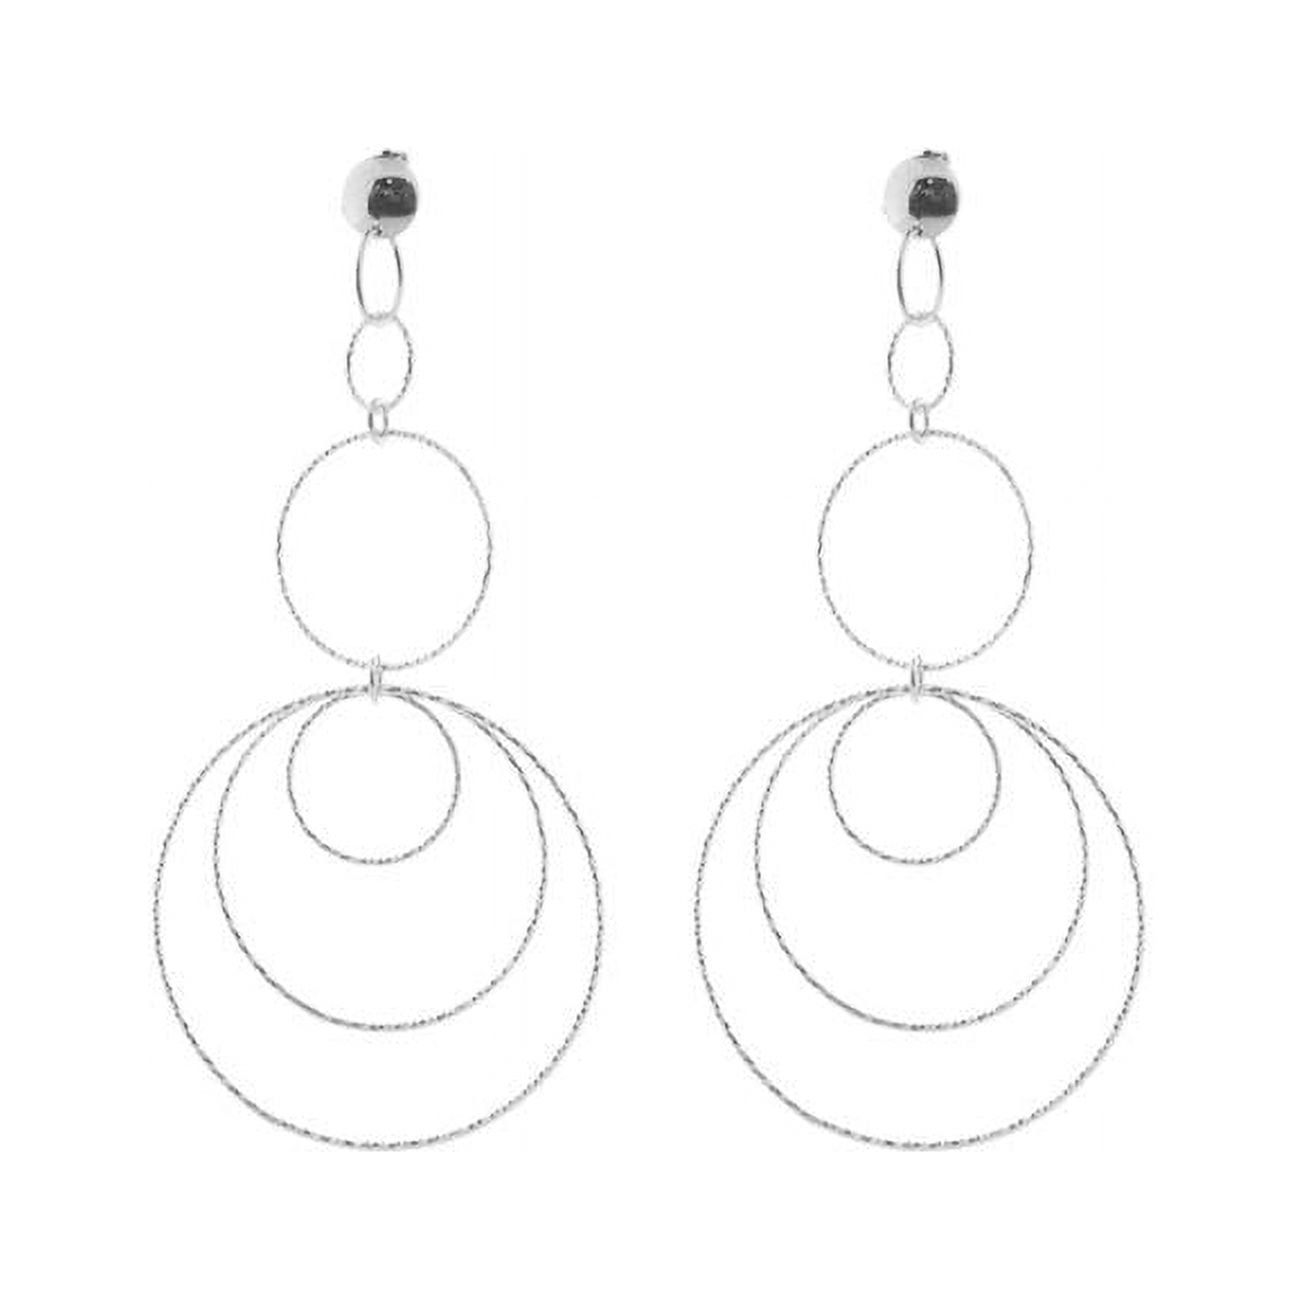 125119 Diamond Cut Concentric Hoop Earrings In Sterling Silver Rhodium Plated